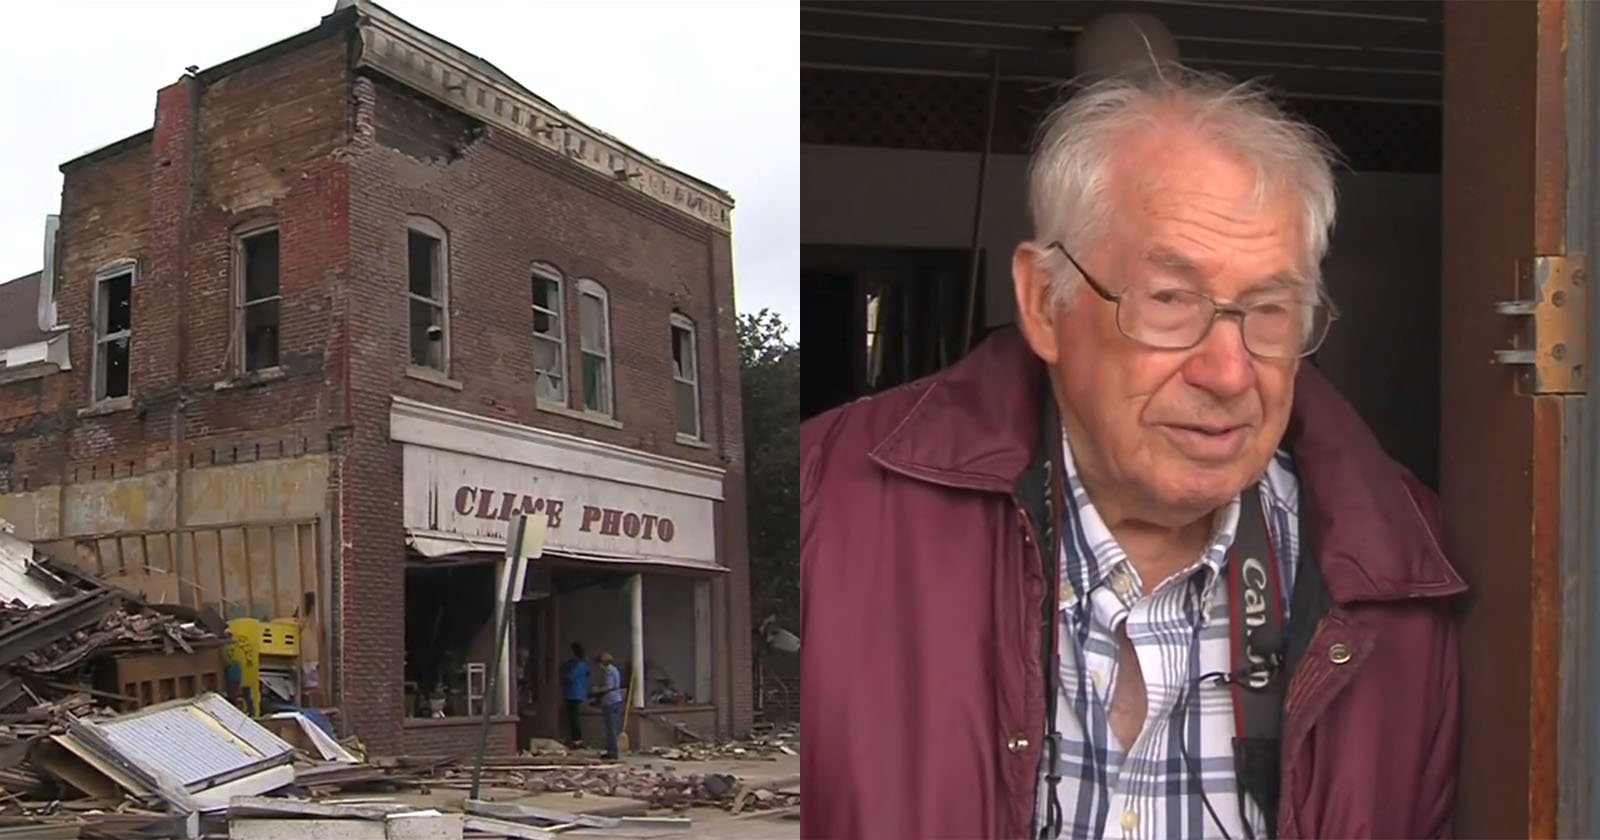 92-Year-Old Photographer Loses 65-Year-Old Photo Business to Tornado